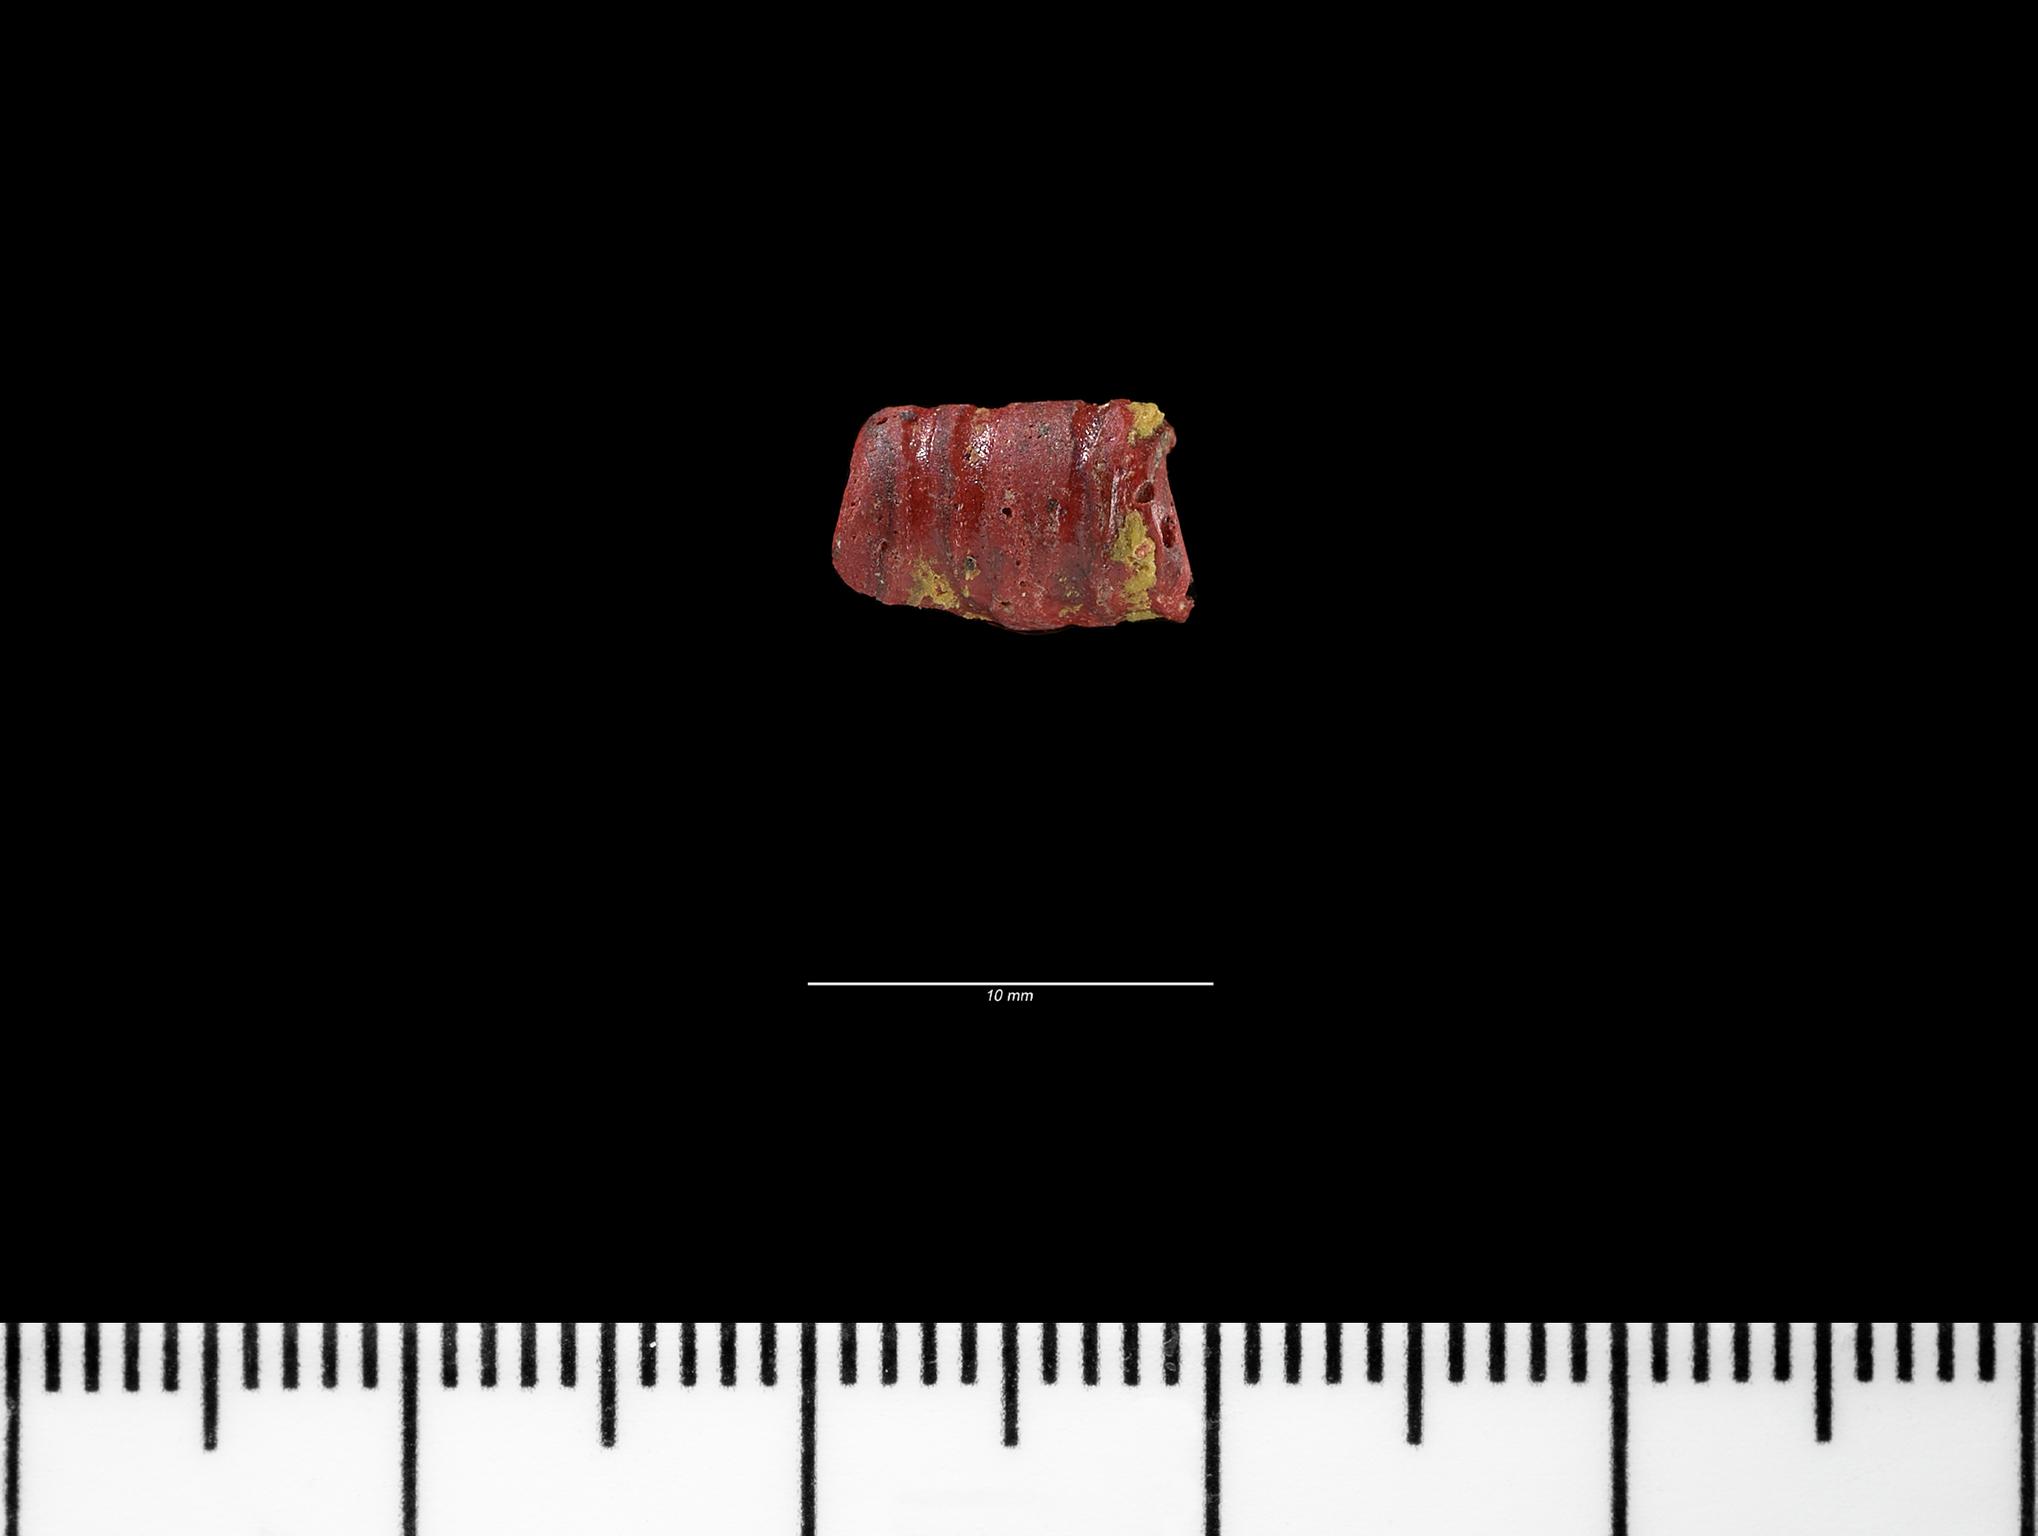 Early Medieval glass bead